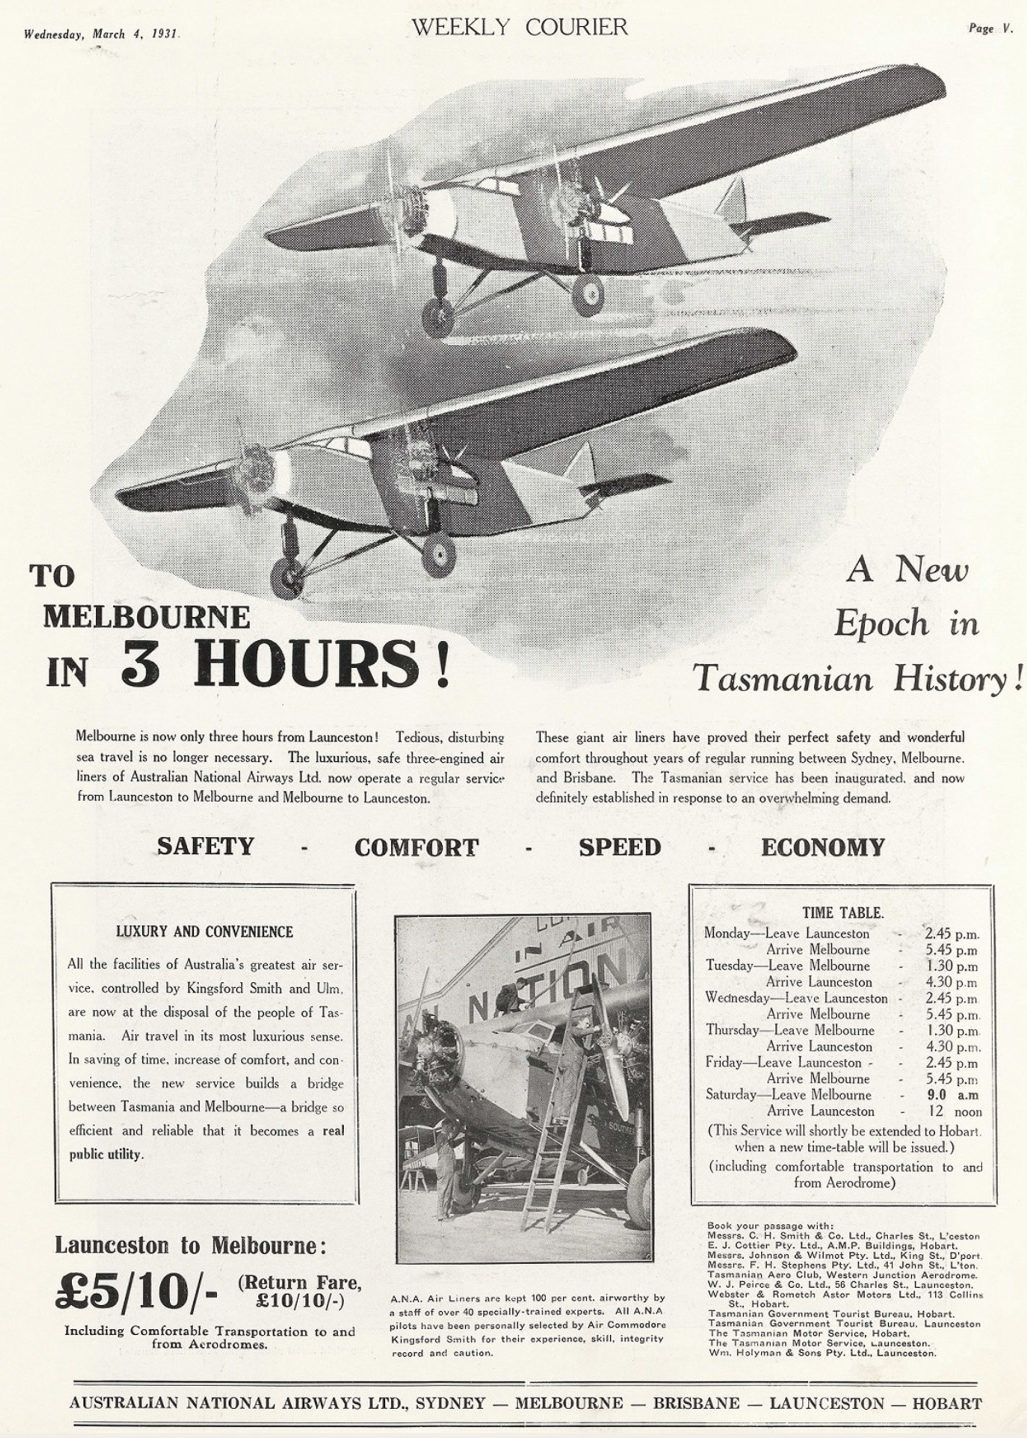 A magazine advertisement for flights between Tasmania and Melbourne in 1931 clamining "to Melbourne in 3 hours!" with images of old planes